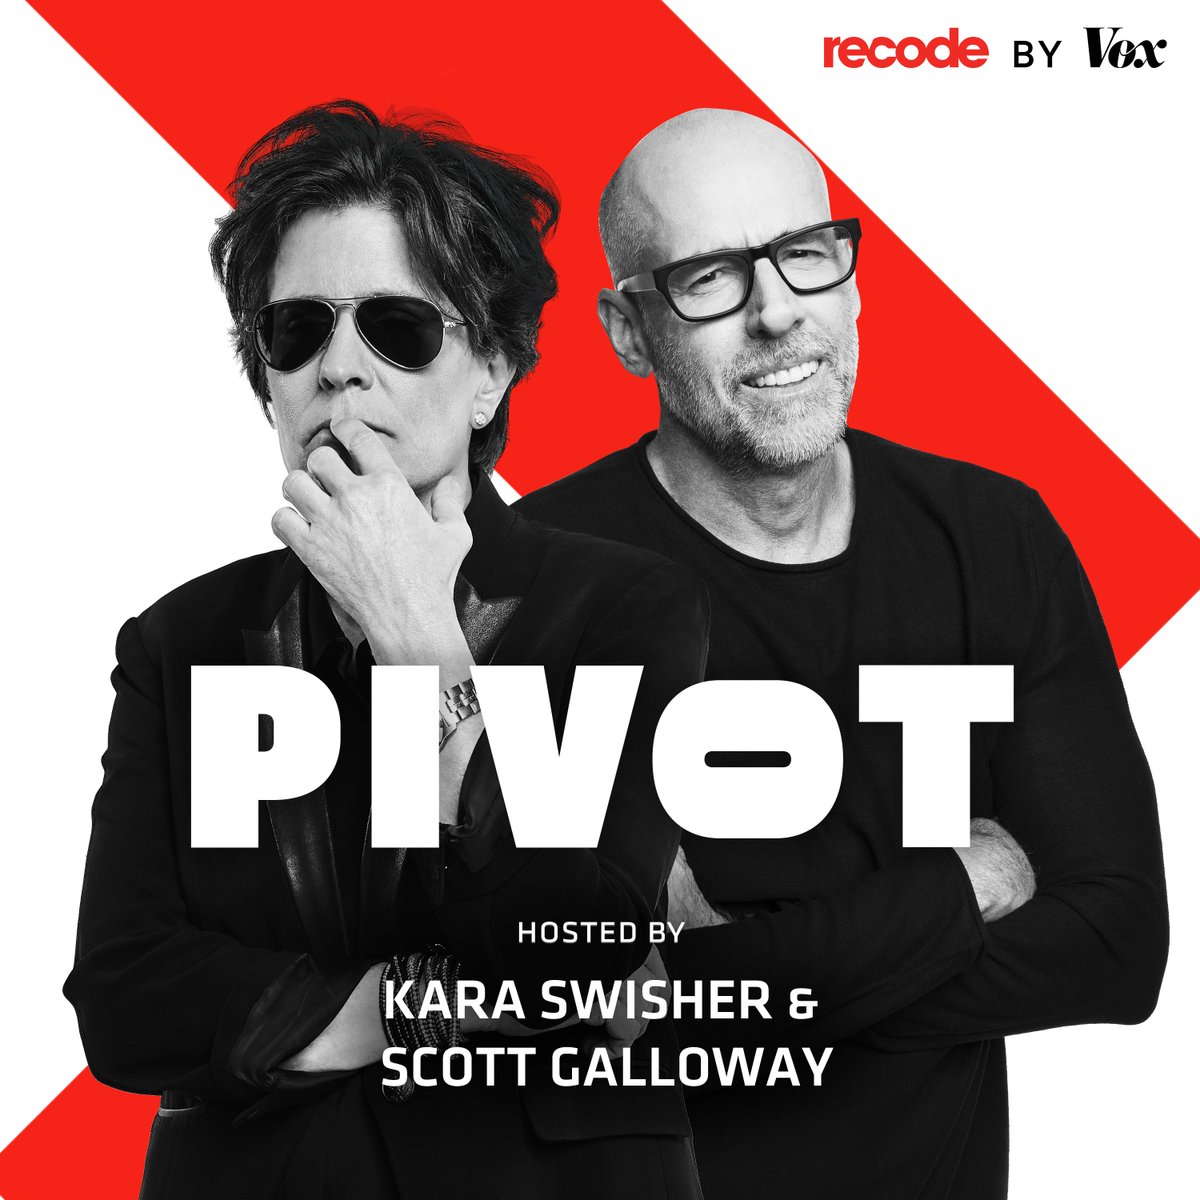 Stay #woke by listening to Pivot on #QlipCast for unfiltered, educated predictions (with some bickering and banter) about tech, business, and politics with @karaswisher and @profgalloway. #SocialAudio #Pivot #BusinessPodcasts #TechPodcasts #PoliticalPodcasts